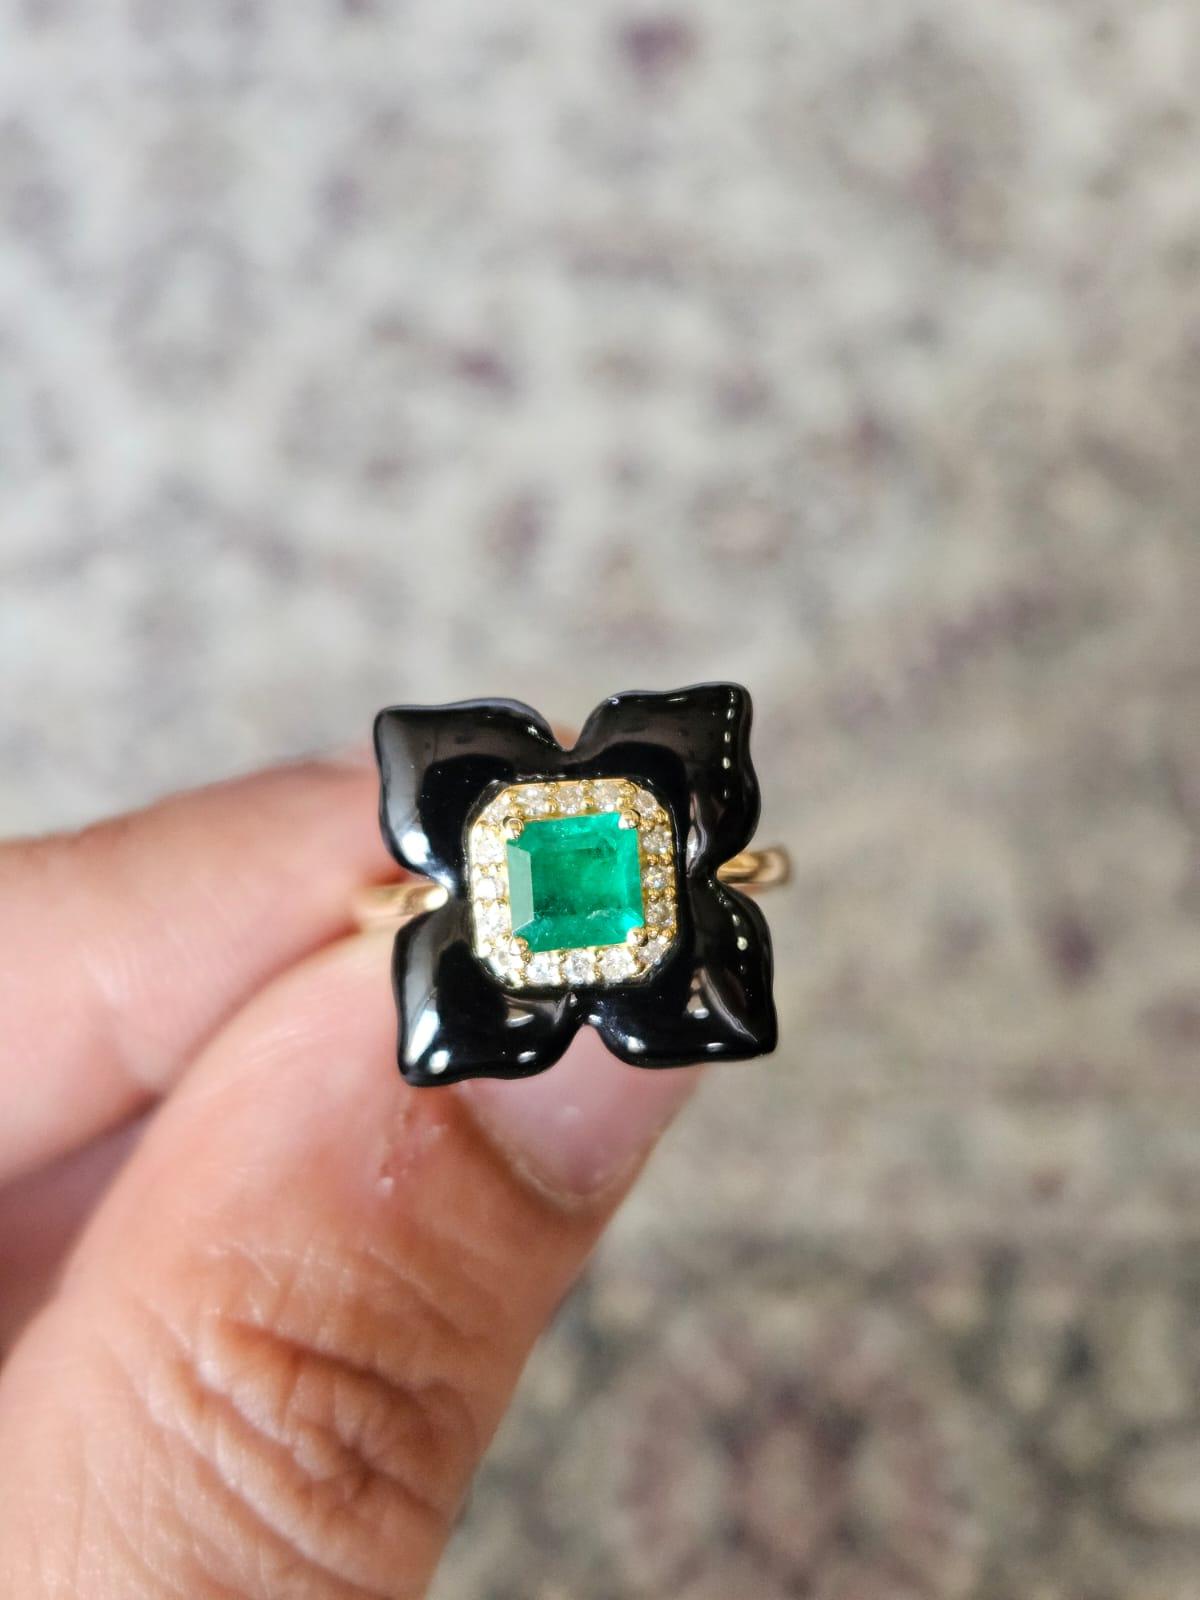 A very beautiful and chic, art - deco style, Black Onyx & Emerald Cocktail Ring set in 18K Yellow Gold & Diamonds. The weight of square Emerald is 0.53 carats. The Emerald is completely natural, without any treatment and is of Zambian origin. The